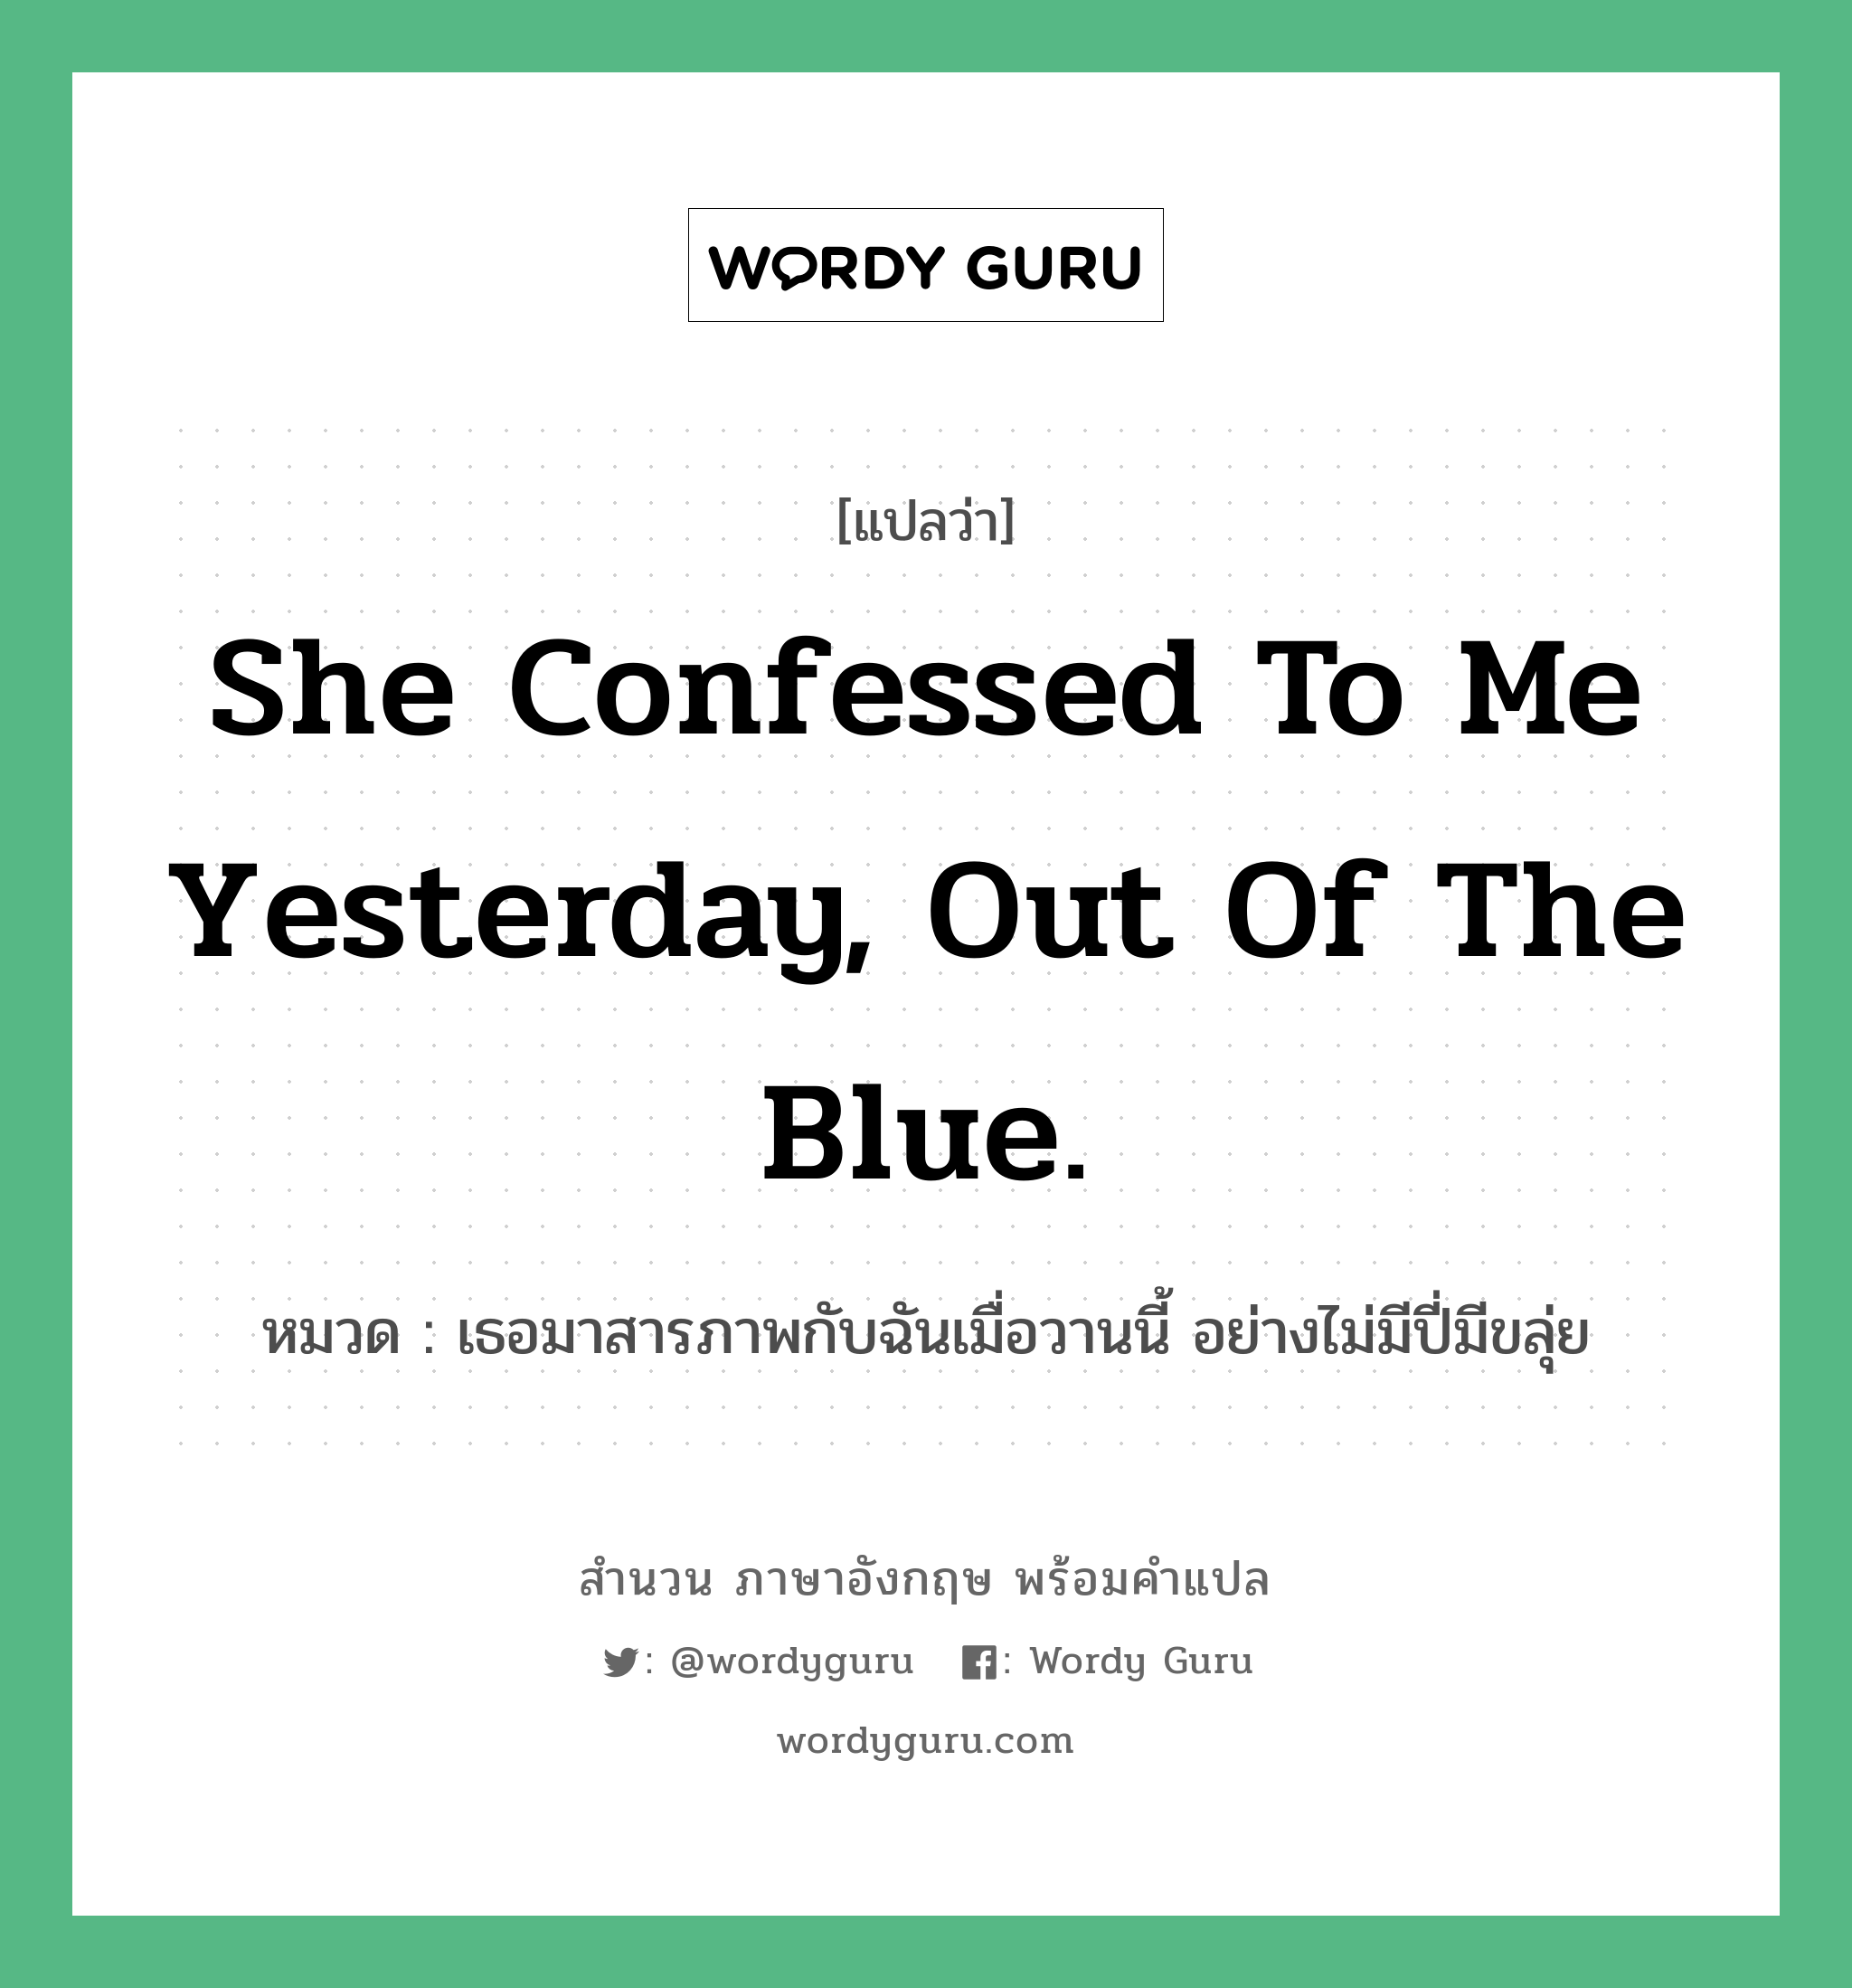 She confessed to me yesterday, out of the blue. แปลว่า?, สำนวนภาษาอังกฤษ She confessed to me yesterday, out of the blue. หมวด เธอมาสารภาพกับฉันเมื่อวานนี้ อย่างไม่มีปี่มีขลุ่ย